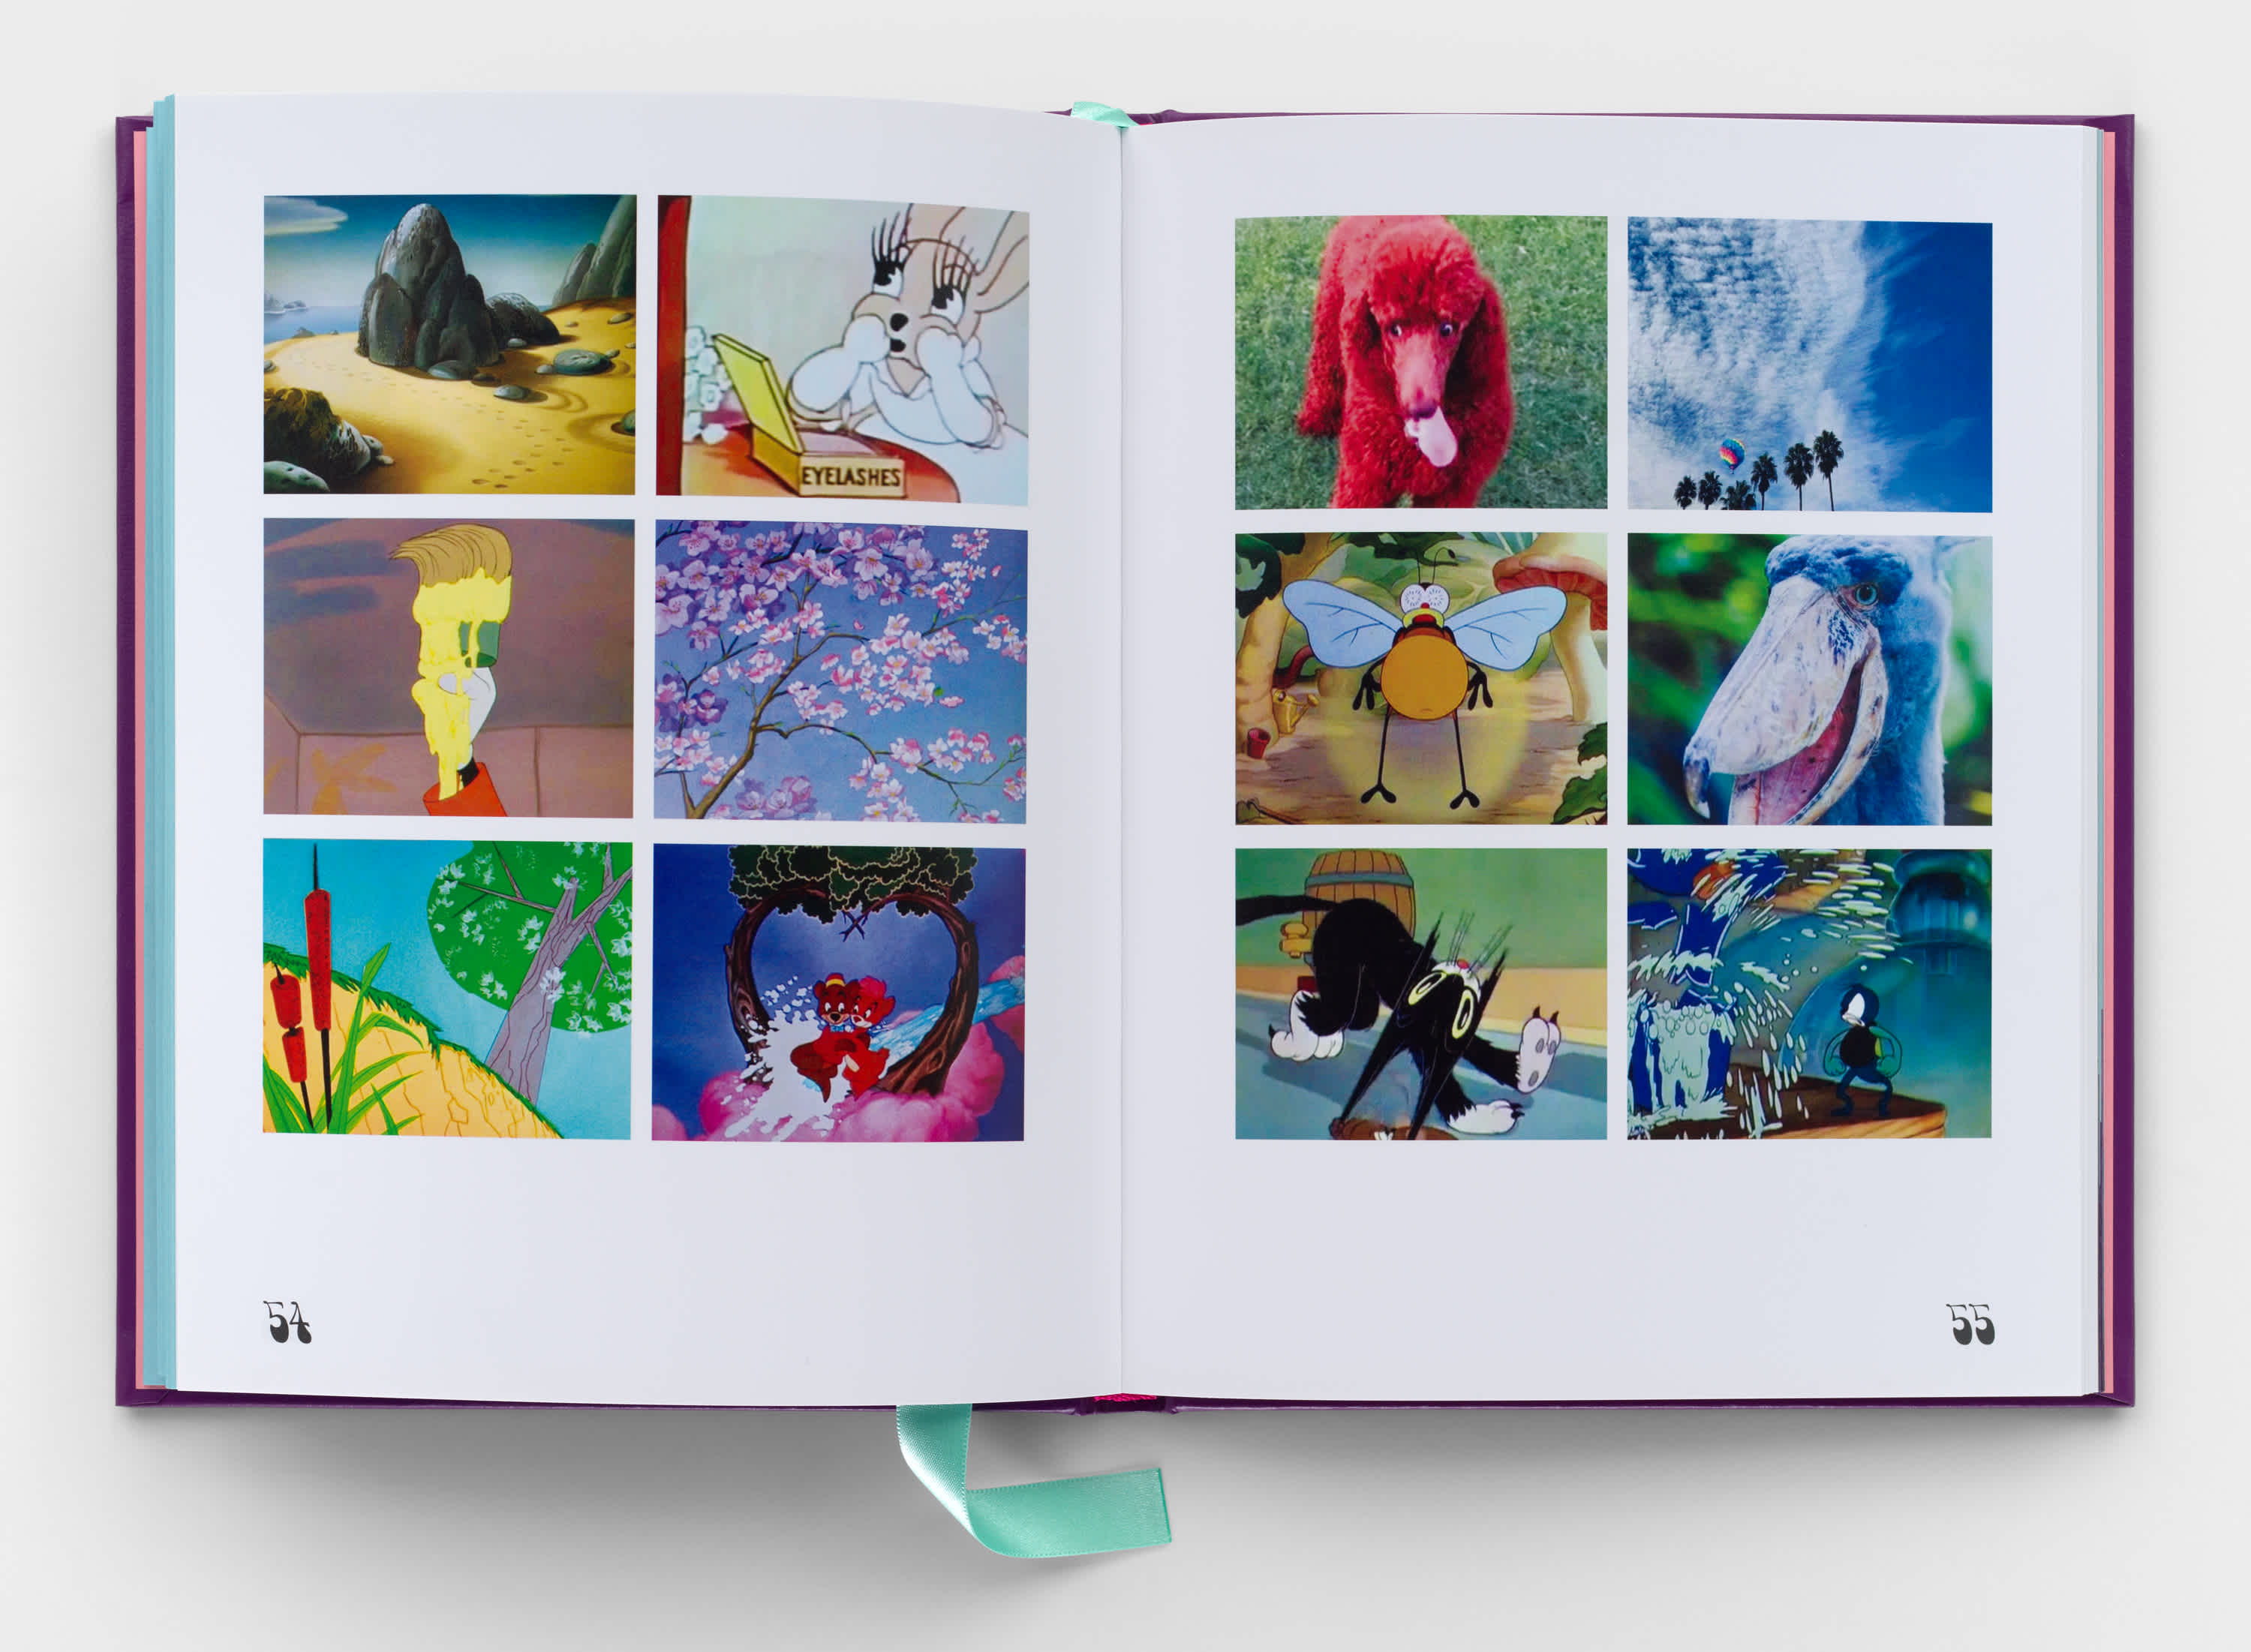 An open book with a grid of six images on each page. The images are all colorful cartoon scenes, landscapes or animals.